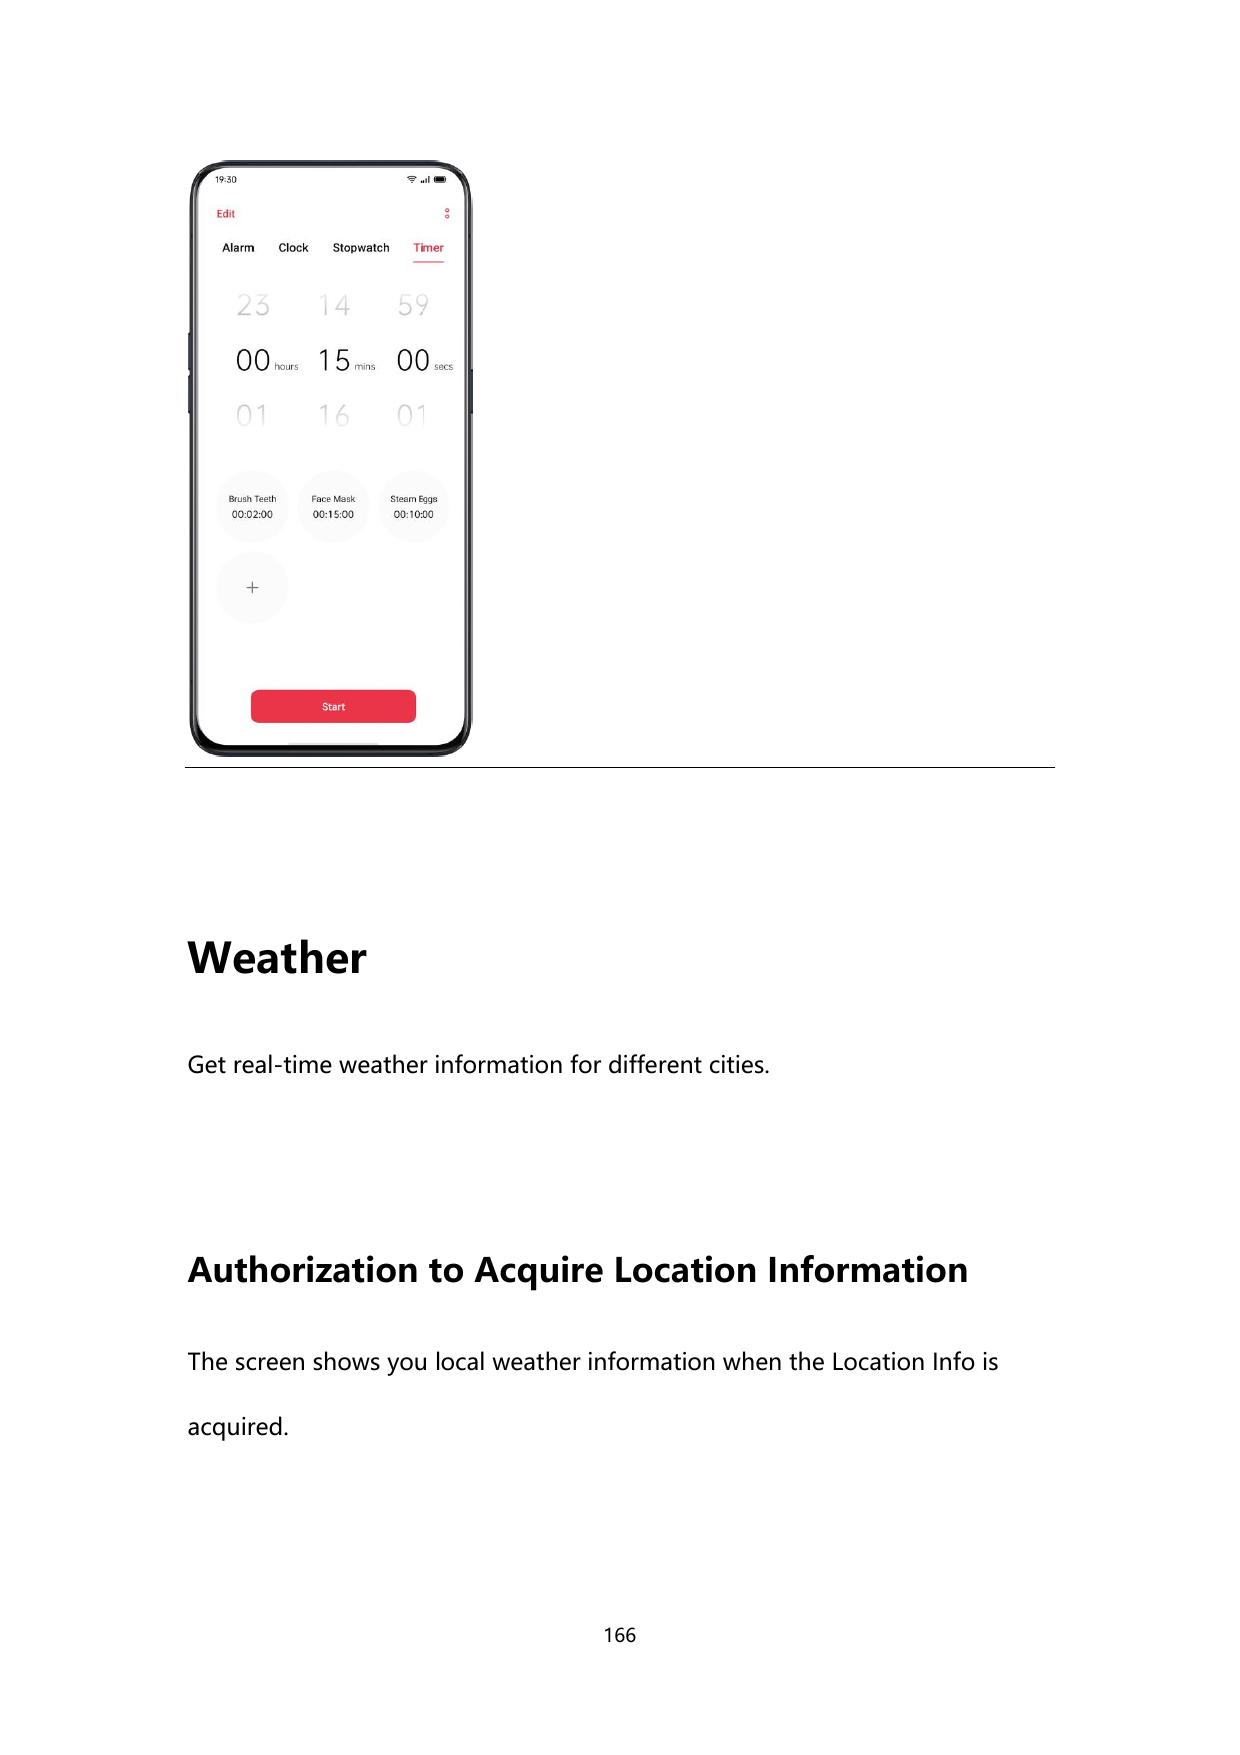 WeatherGet real-time weather information for different cities.Authorization to Acquire Location InformationThe screen shows you 